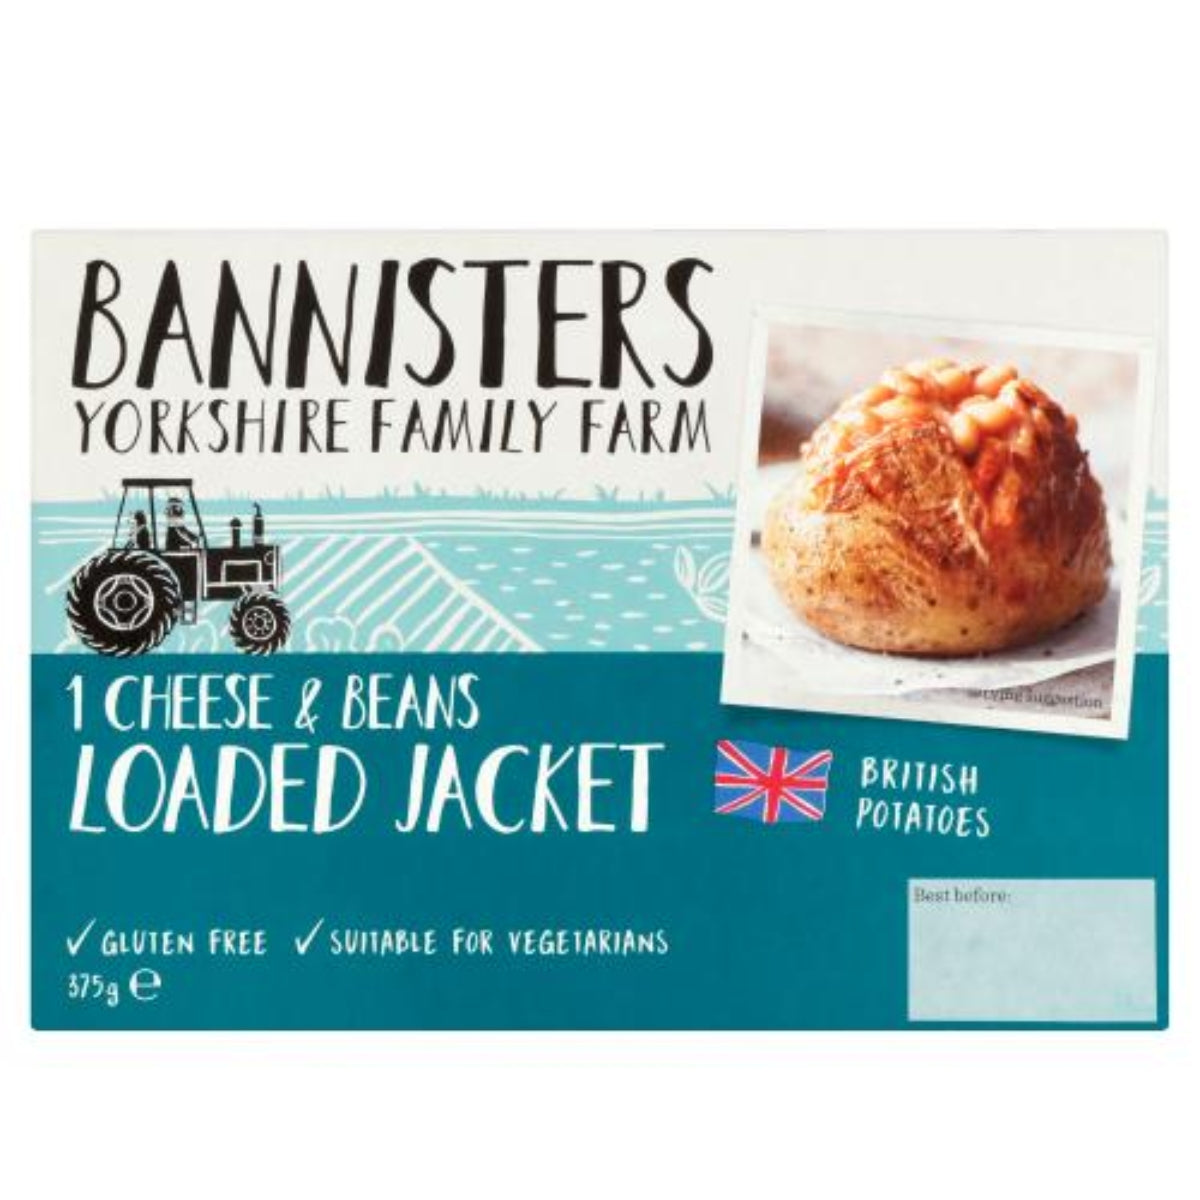 Bannisters - Cheddar Jacket Potato - 375g cheese and beans loaded jacket.